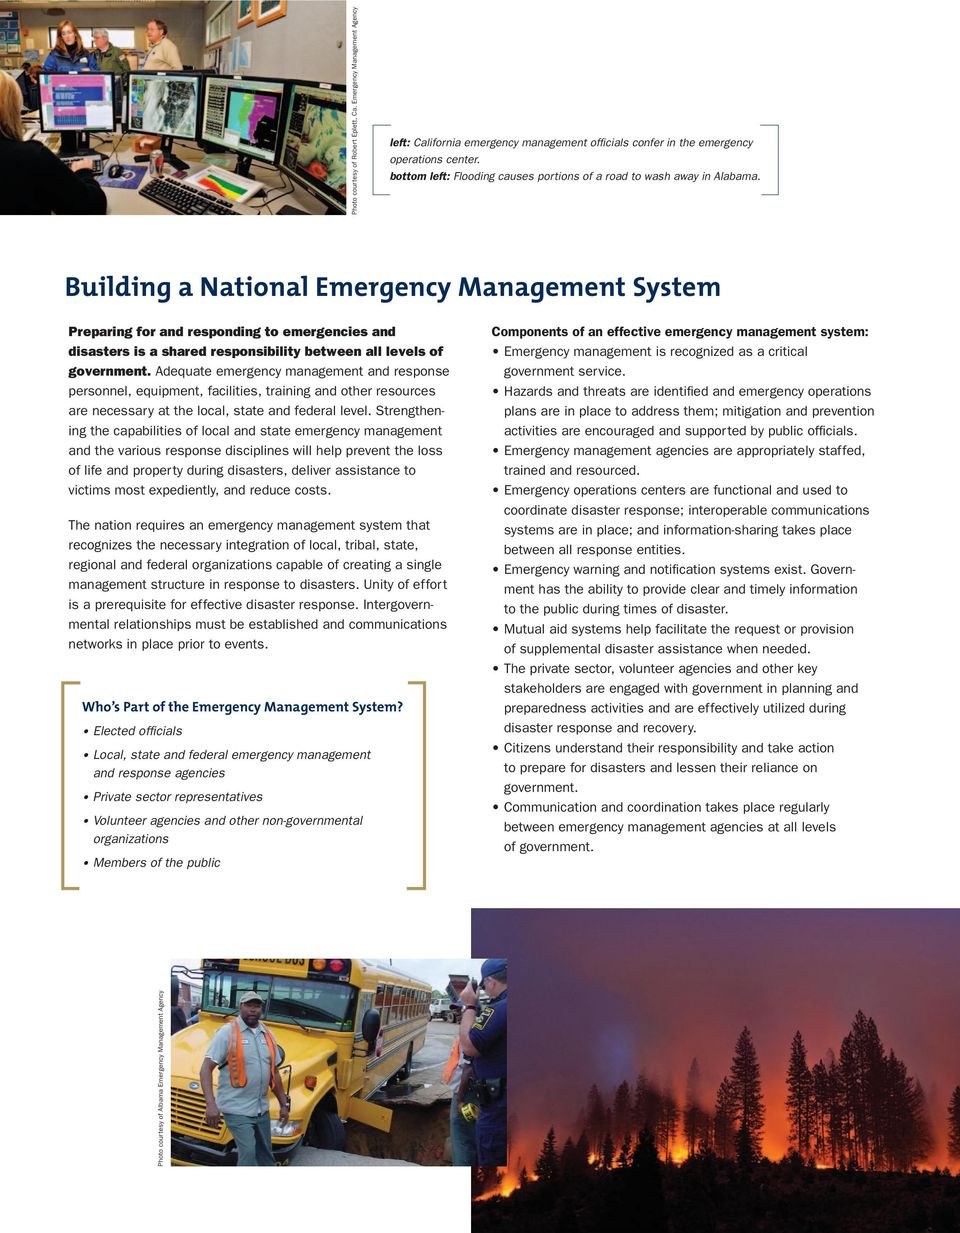 Adequate emergency management and response personnel, equipment, facilities, training and other resources are necessary at the local, state and federal level.